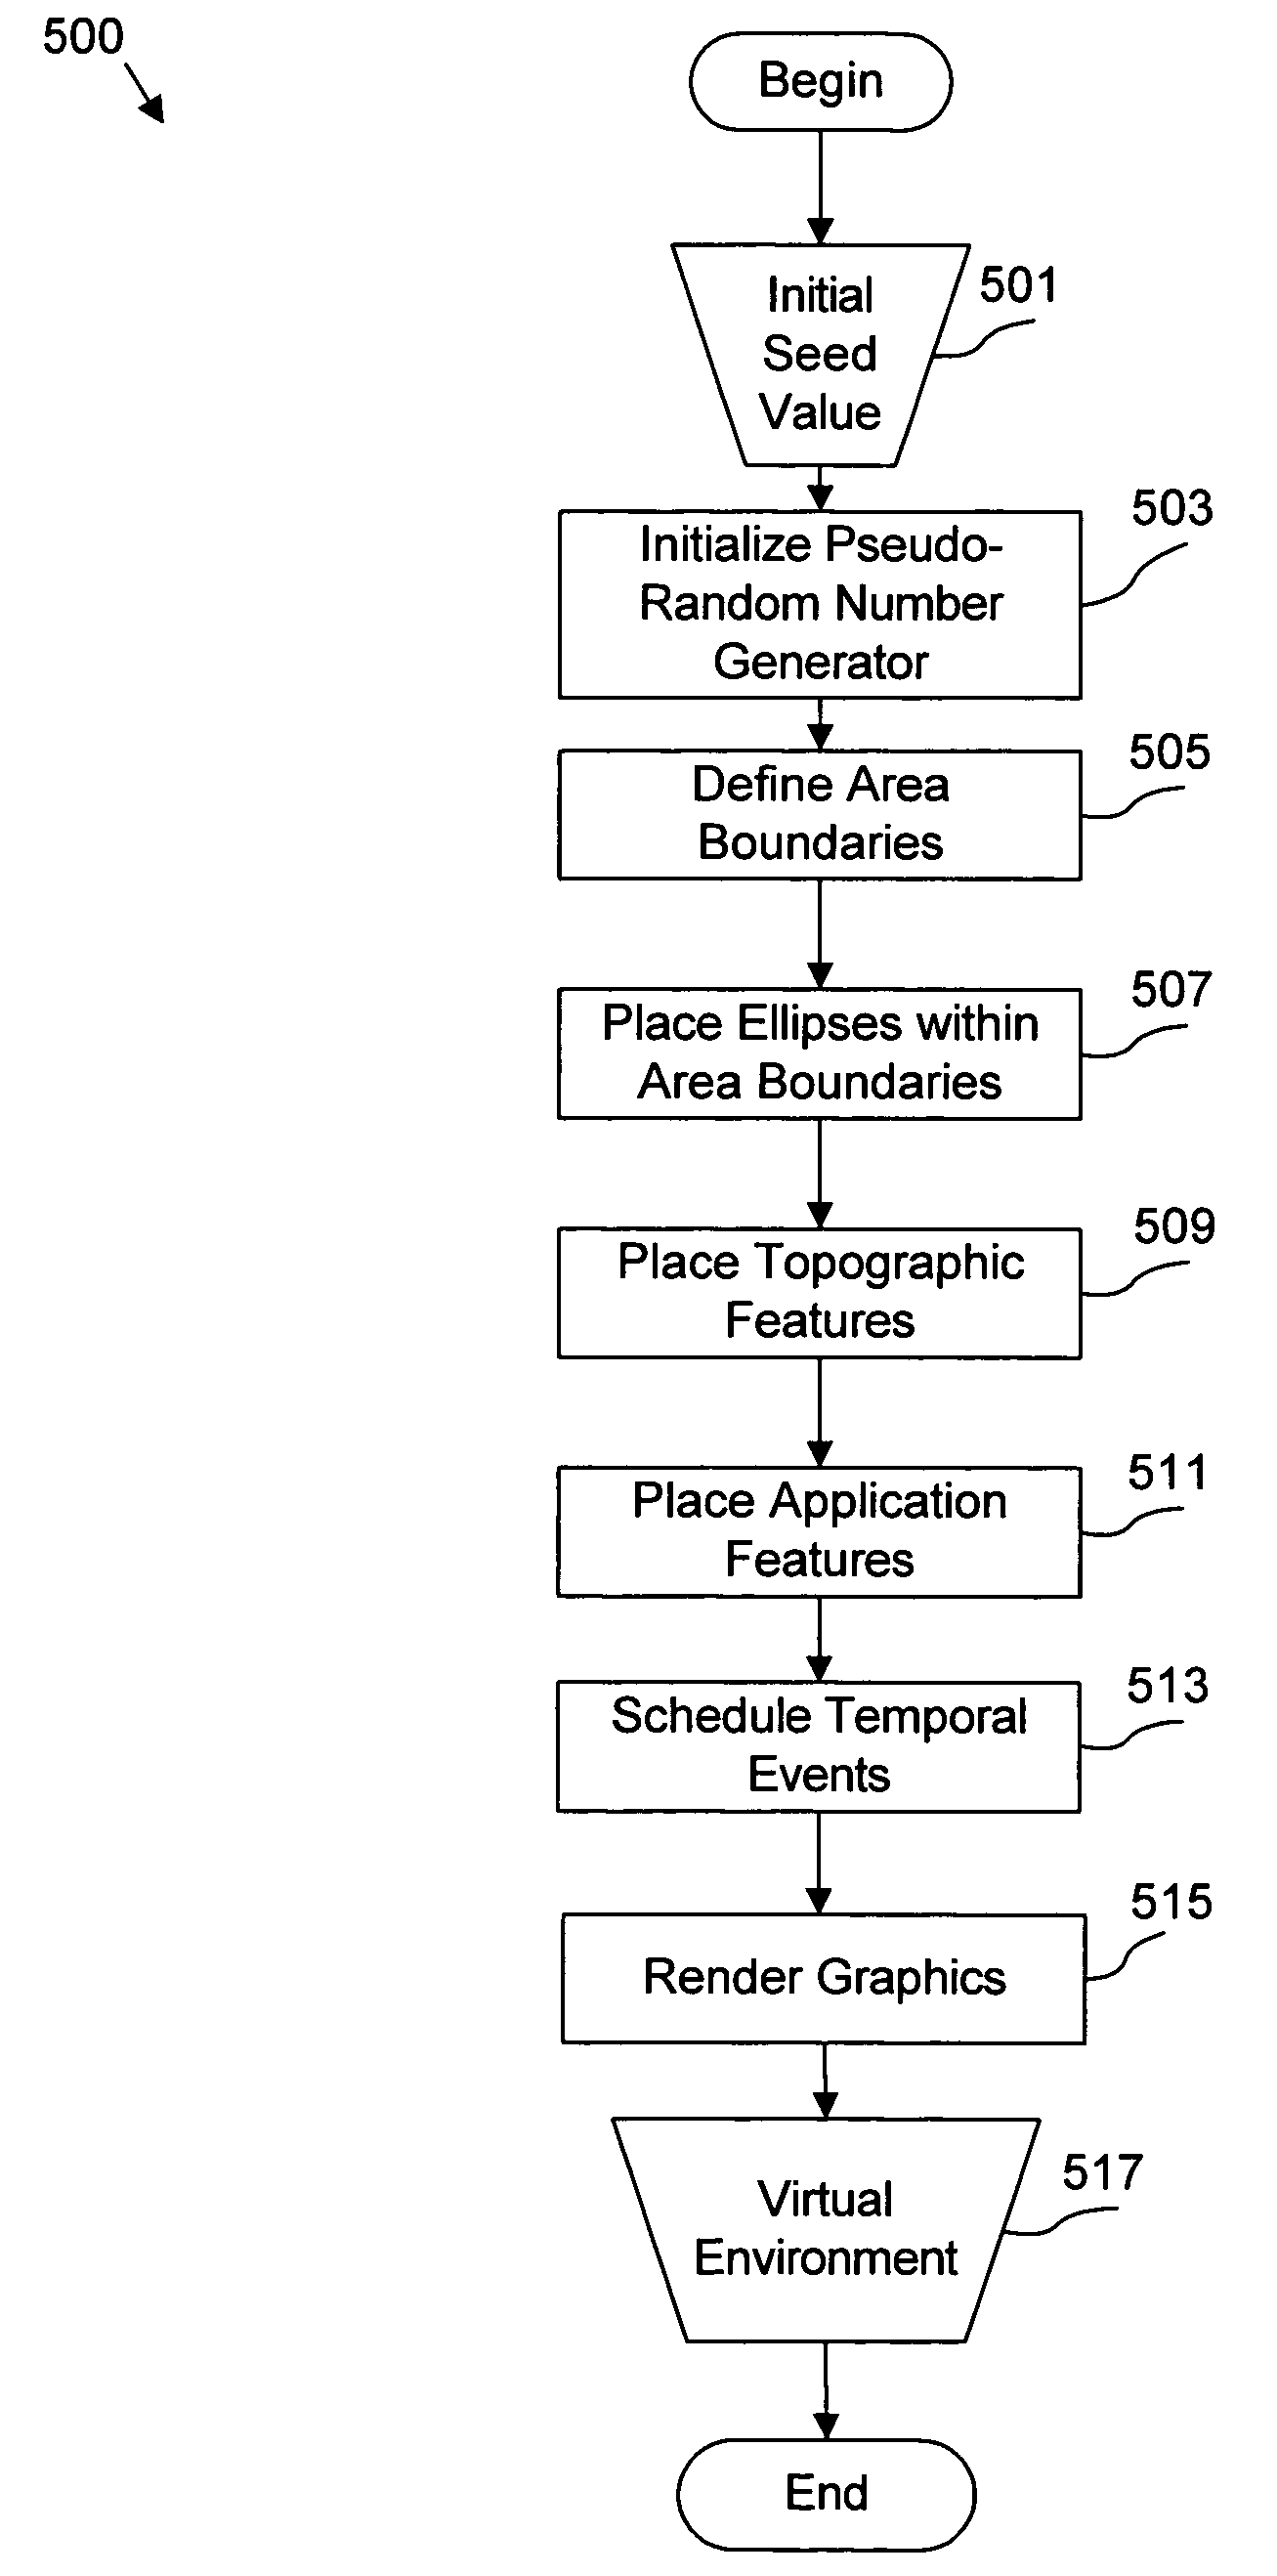 Apparatus, system, and method for automated generation of a virtual environment for software applications